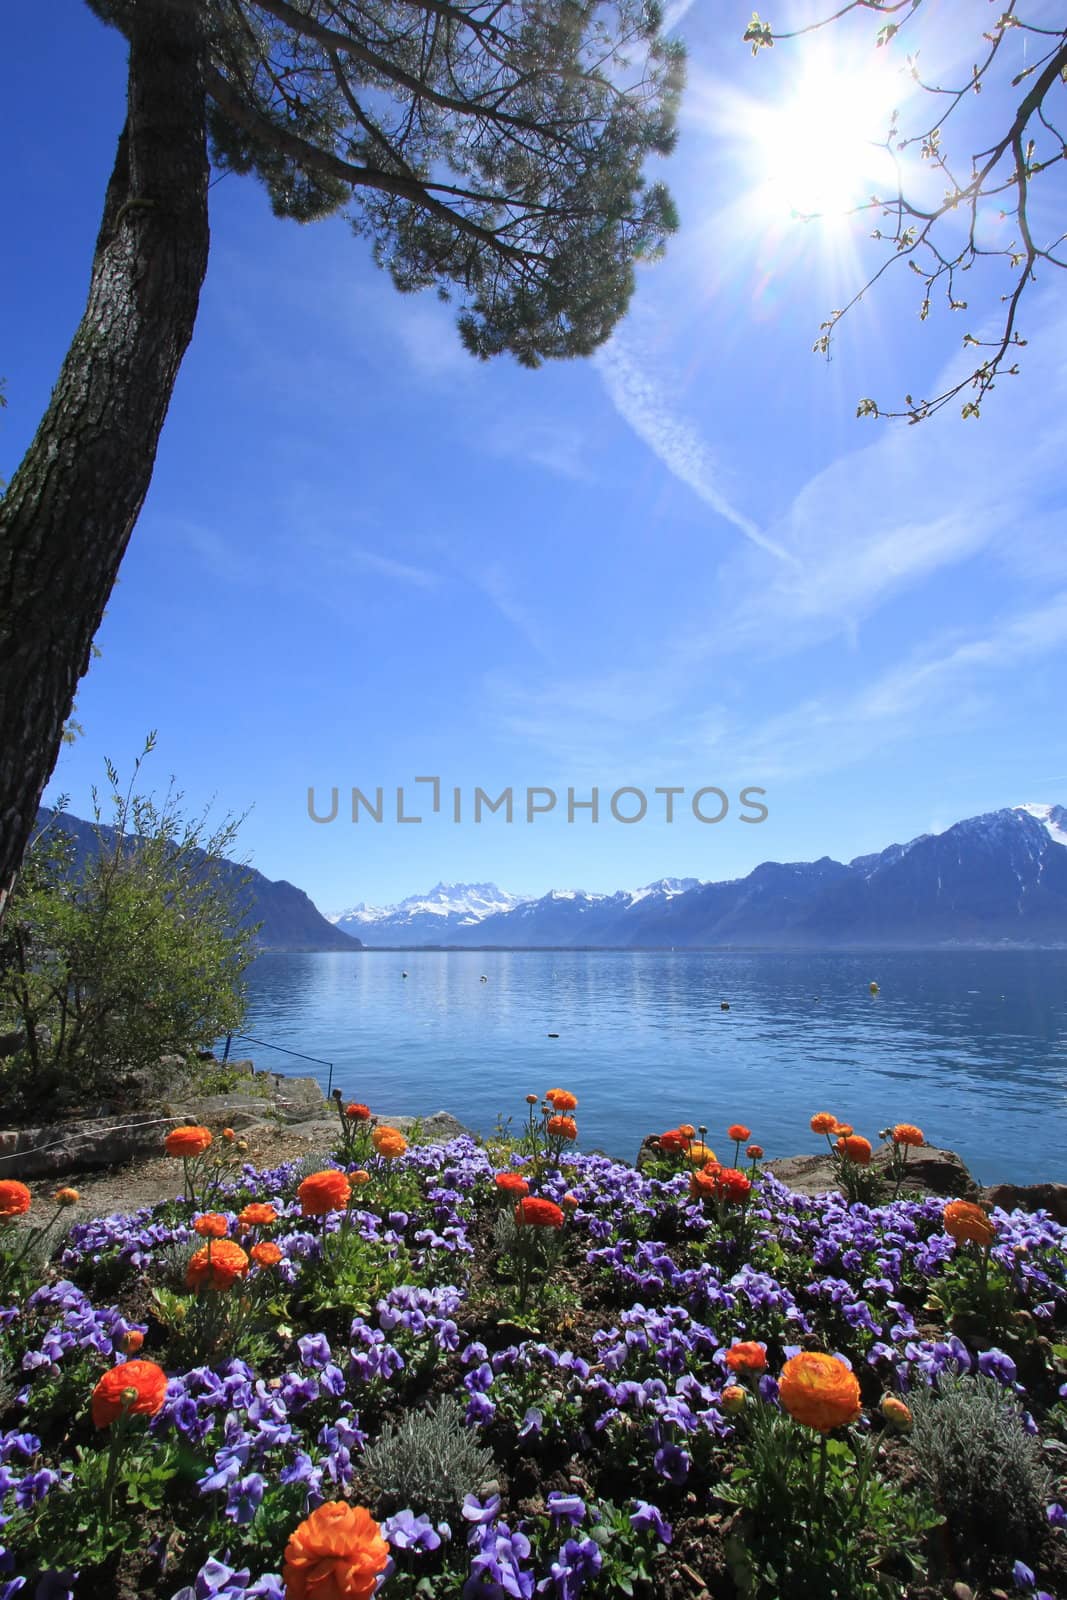 Colorful flowers at springtime at Geneva lake, Montreux, Switzerland. See Alps mountains in the background.